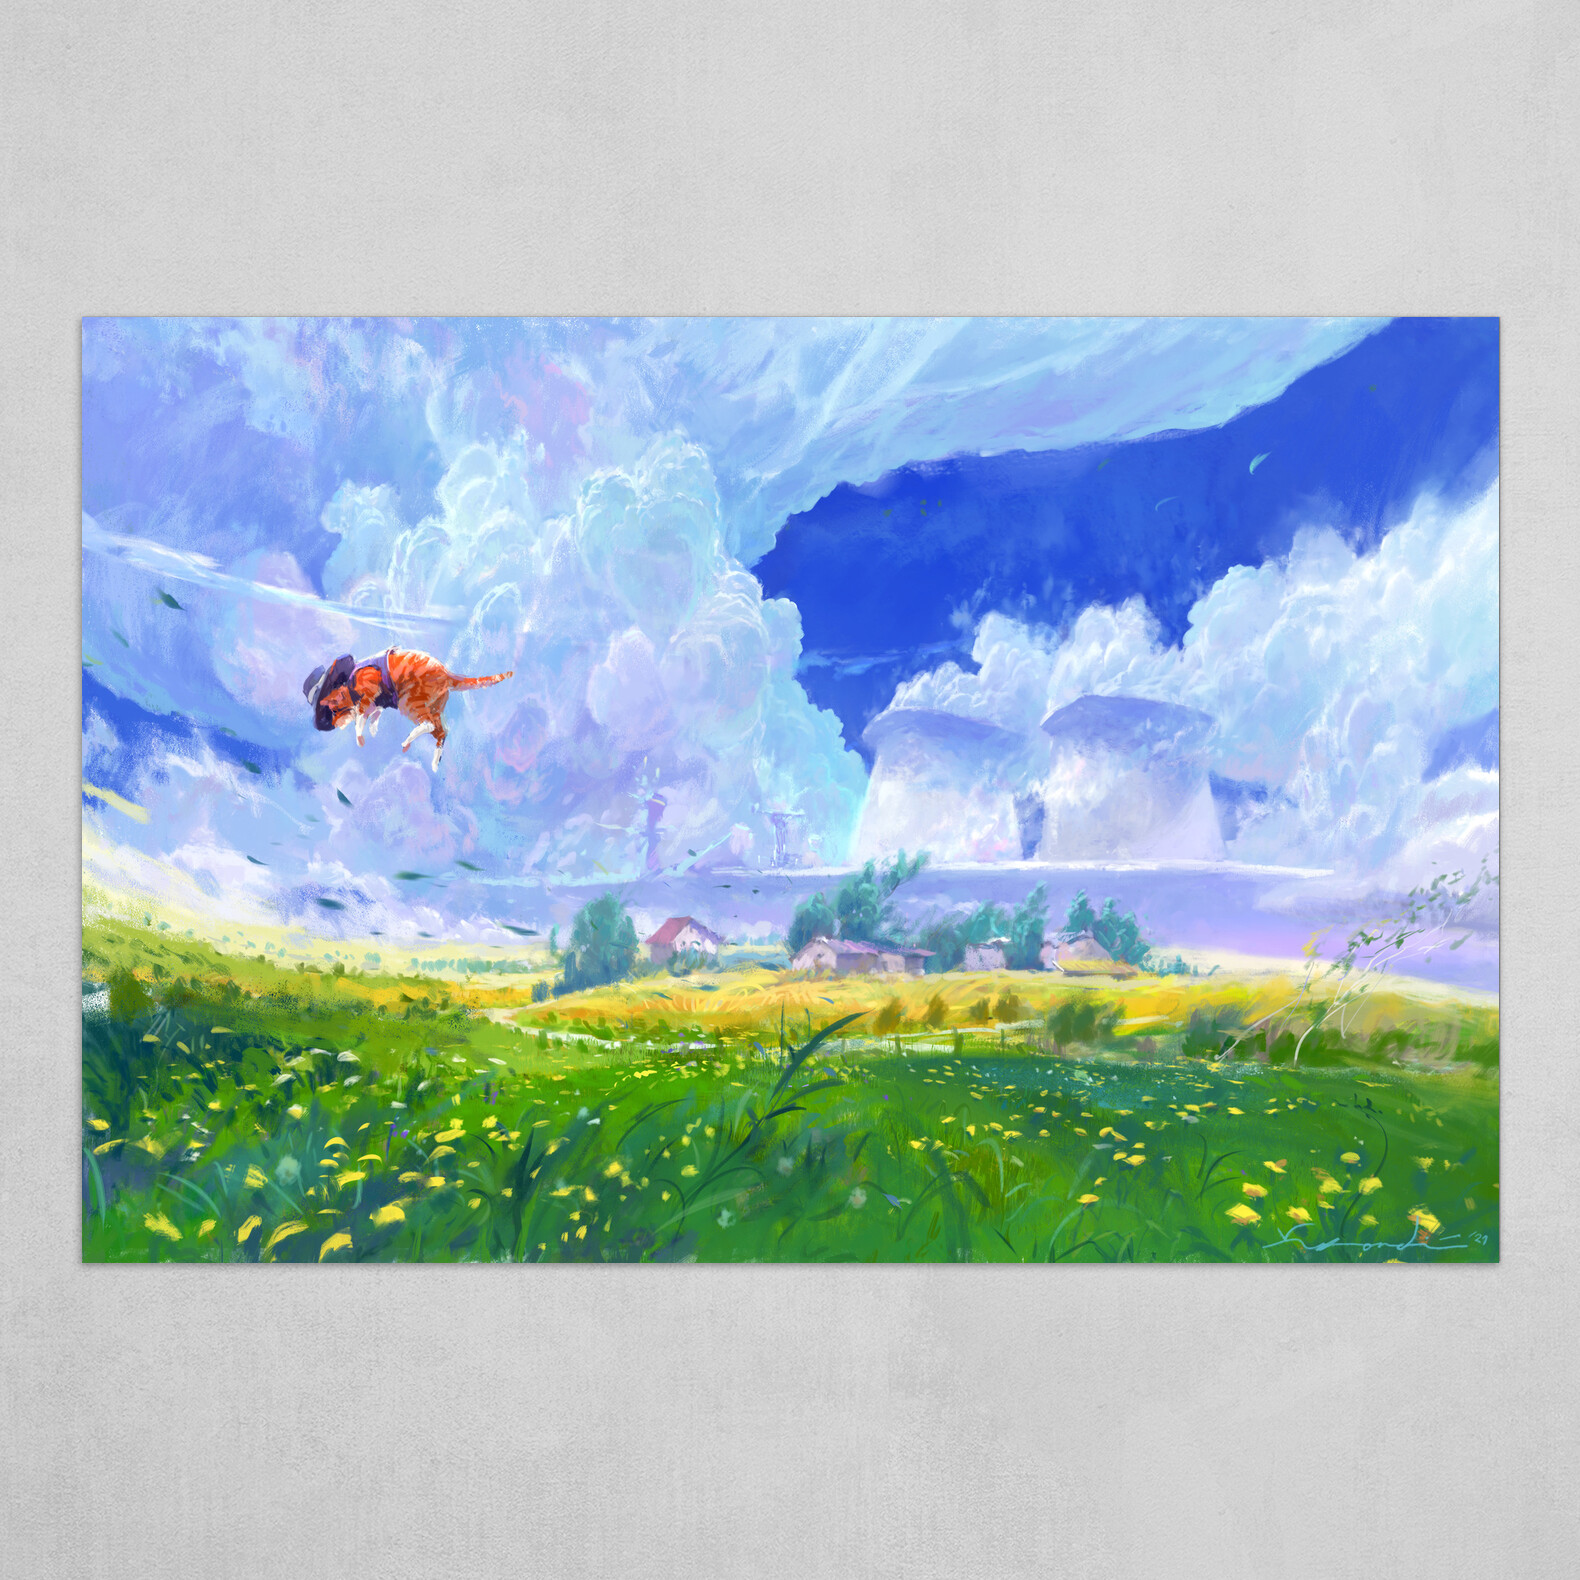 Will of the Winds: Canvas and Metal print edit